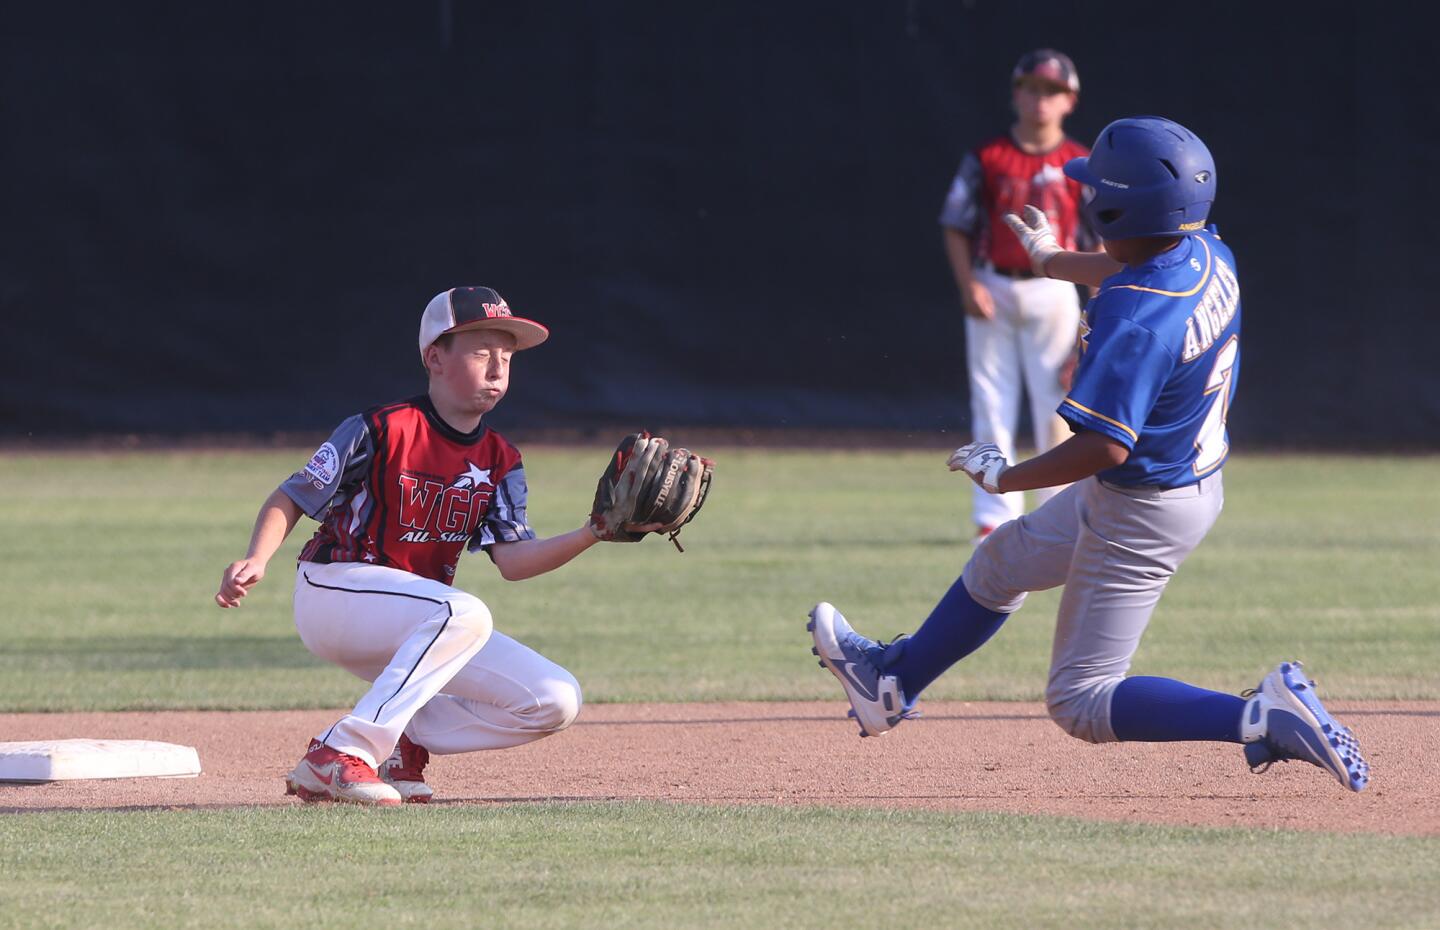 Fountain Valley's Eric Angeles slides into second as West Garden Grove short Troy Atkins prepares to tag in the PONY Bronco 12-and-under Section tournament at Del Obispo Community Park in Dana Point on Friday.